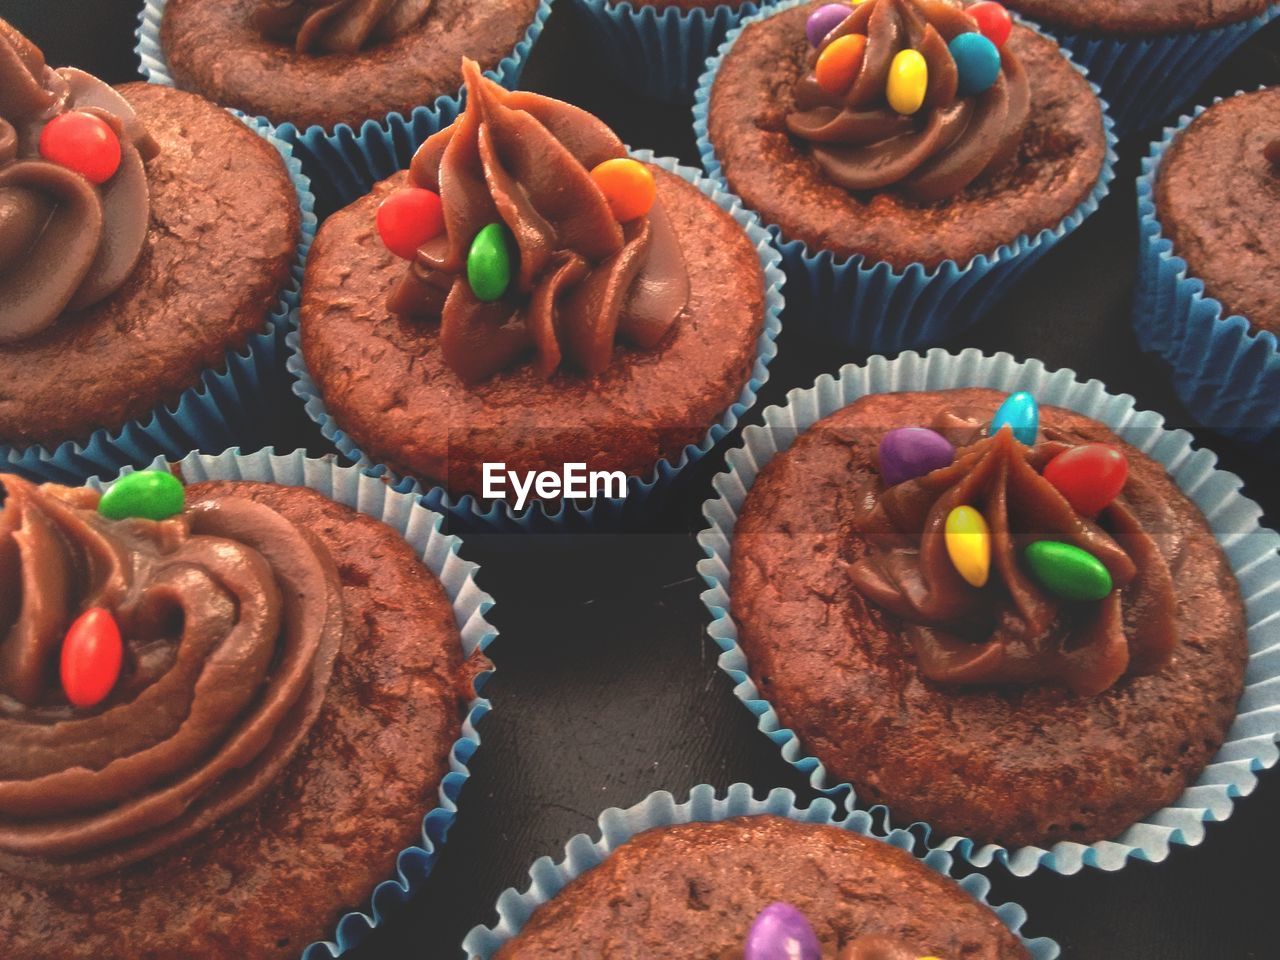 HIGH ANGLE VIEW OF CUPCAKES